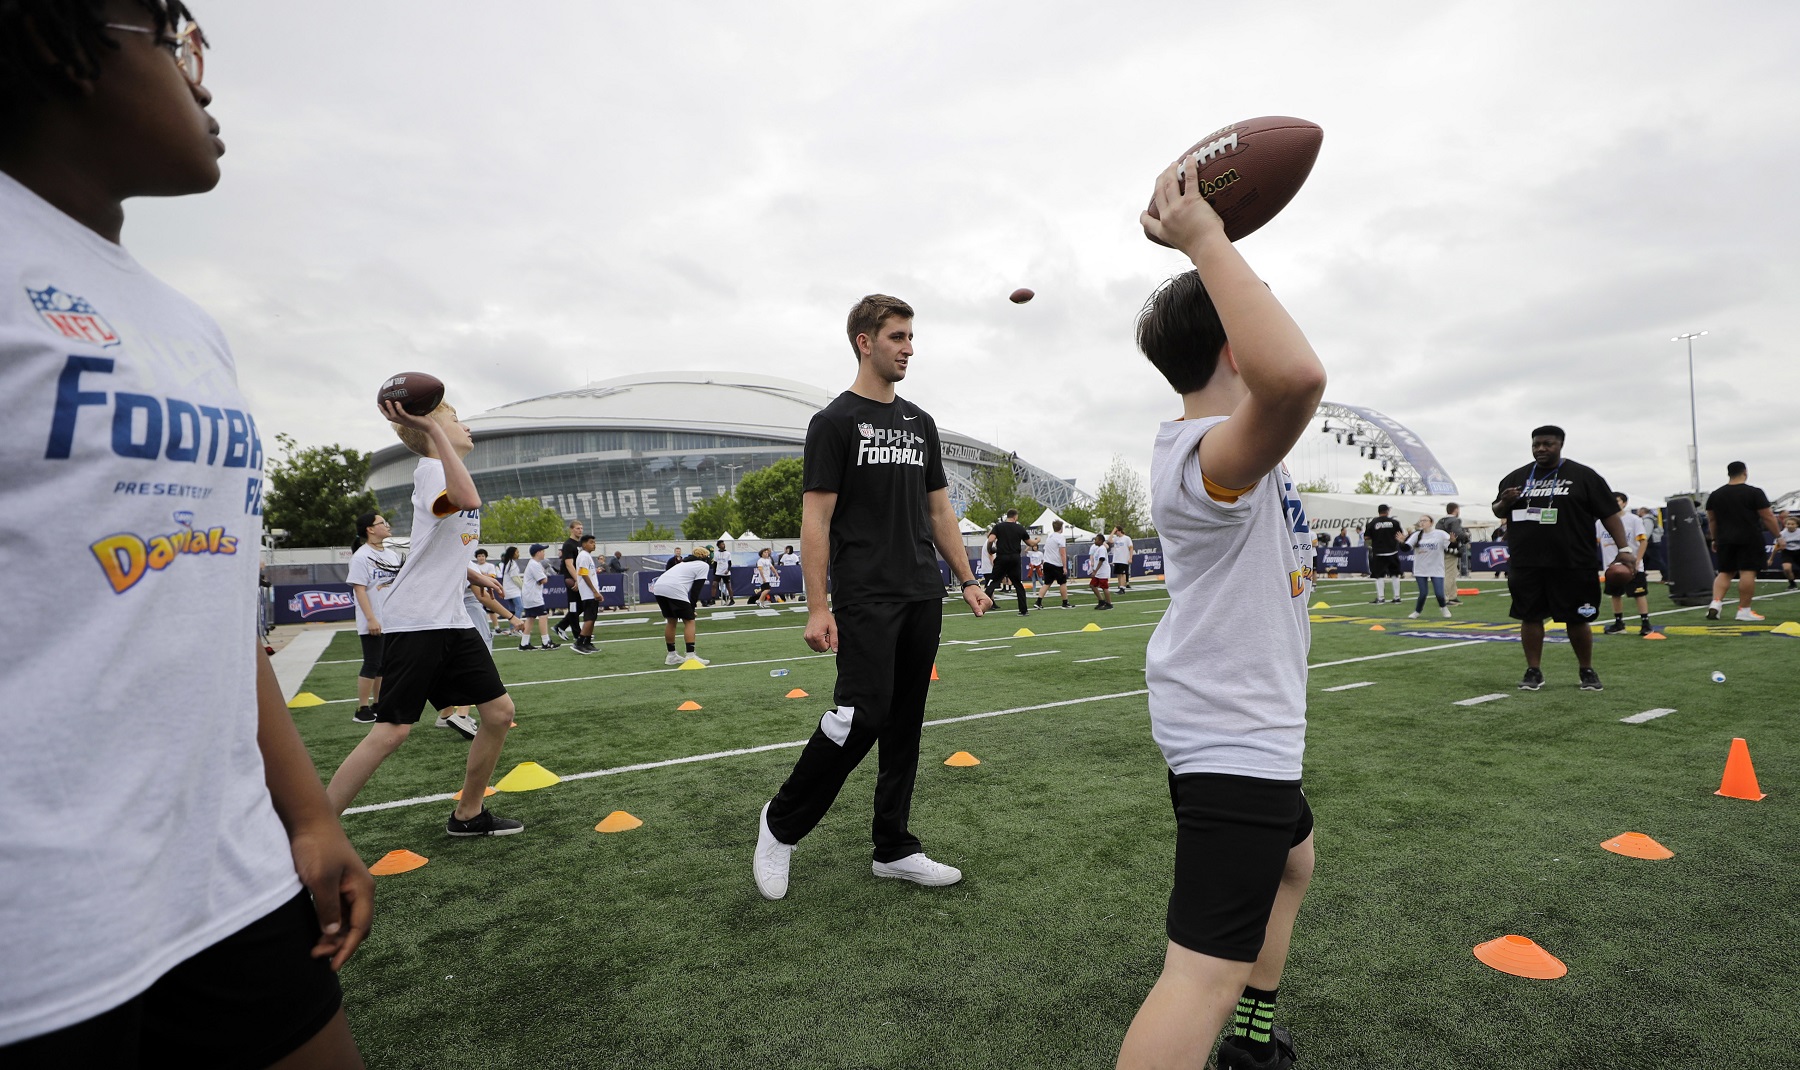 NFL Players and Legends to Host Youth Football Camps this Summer   NFL Football Operations